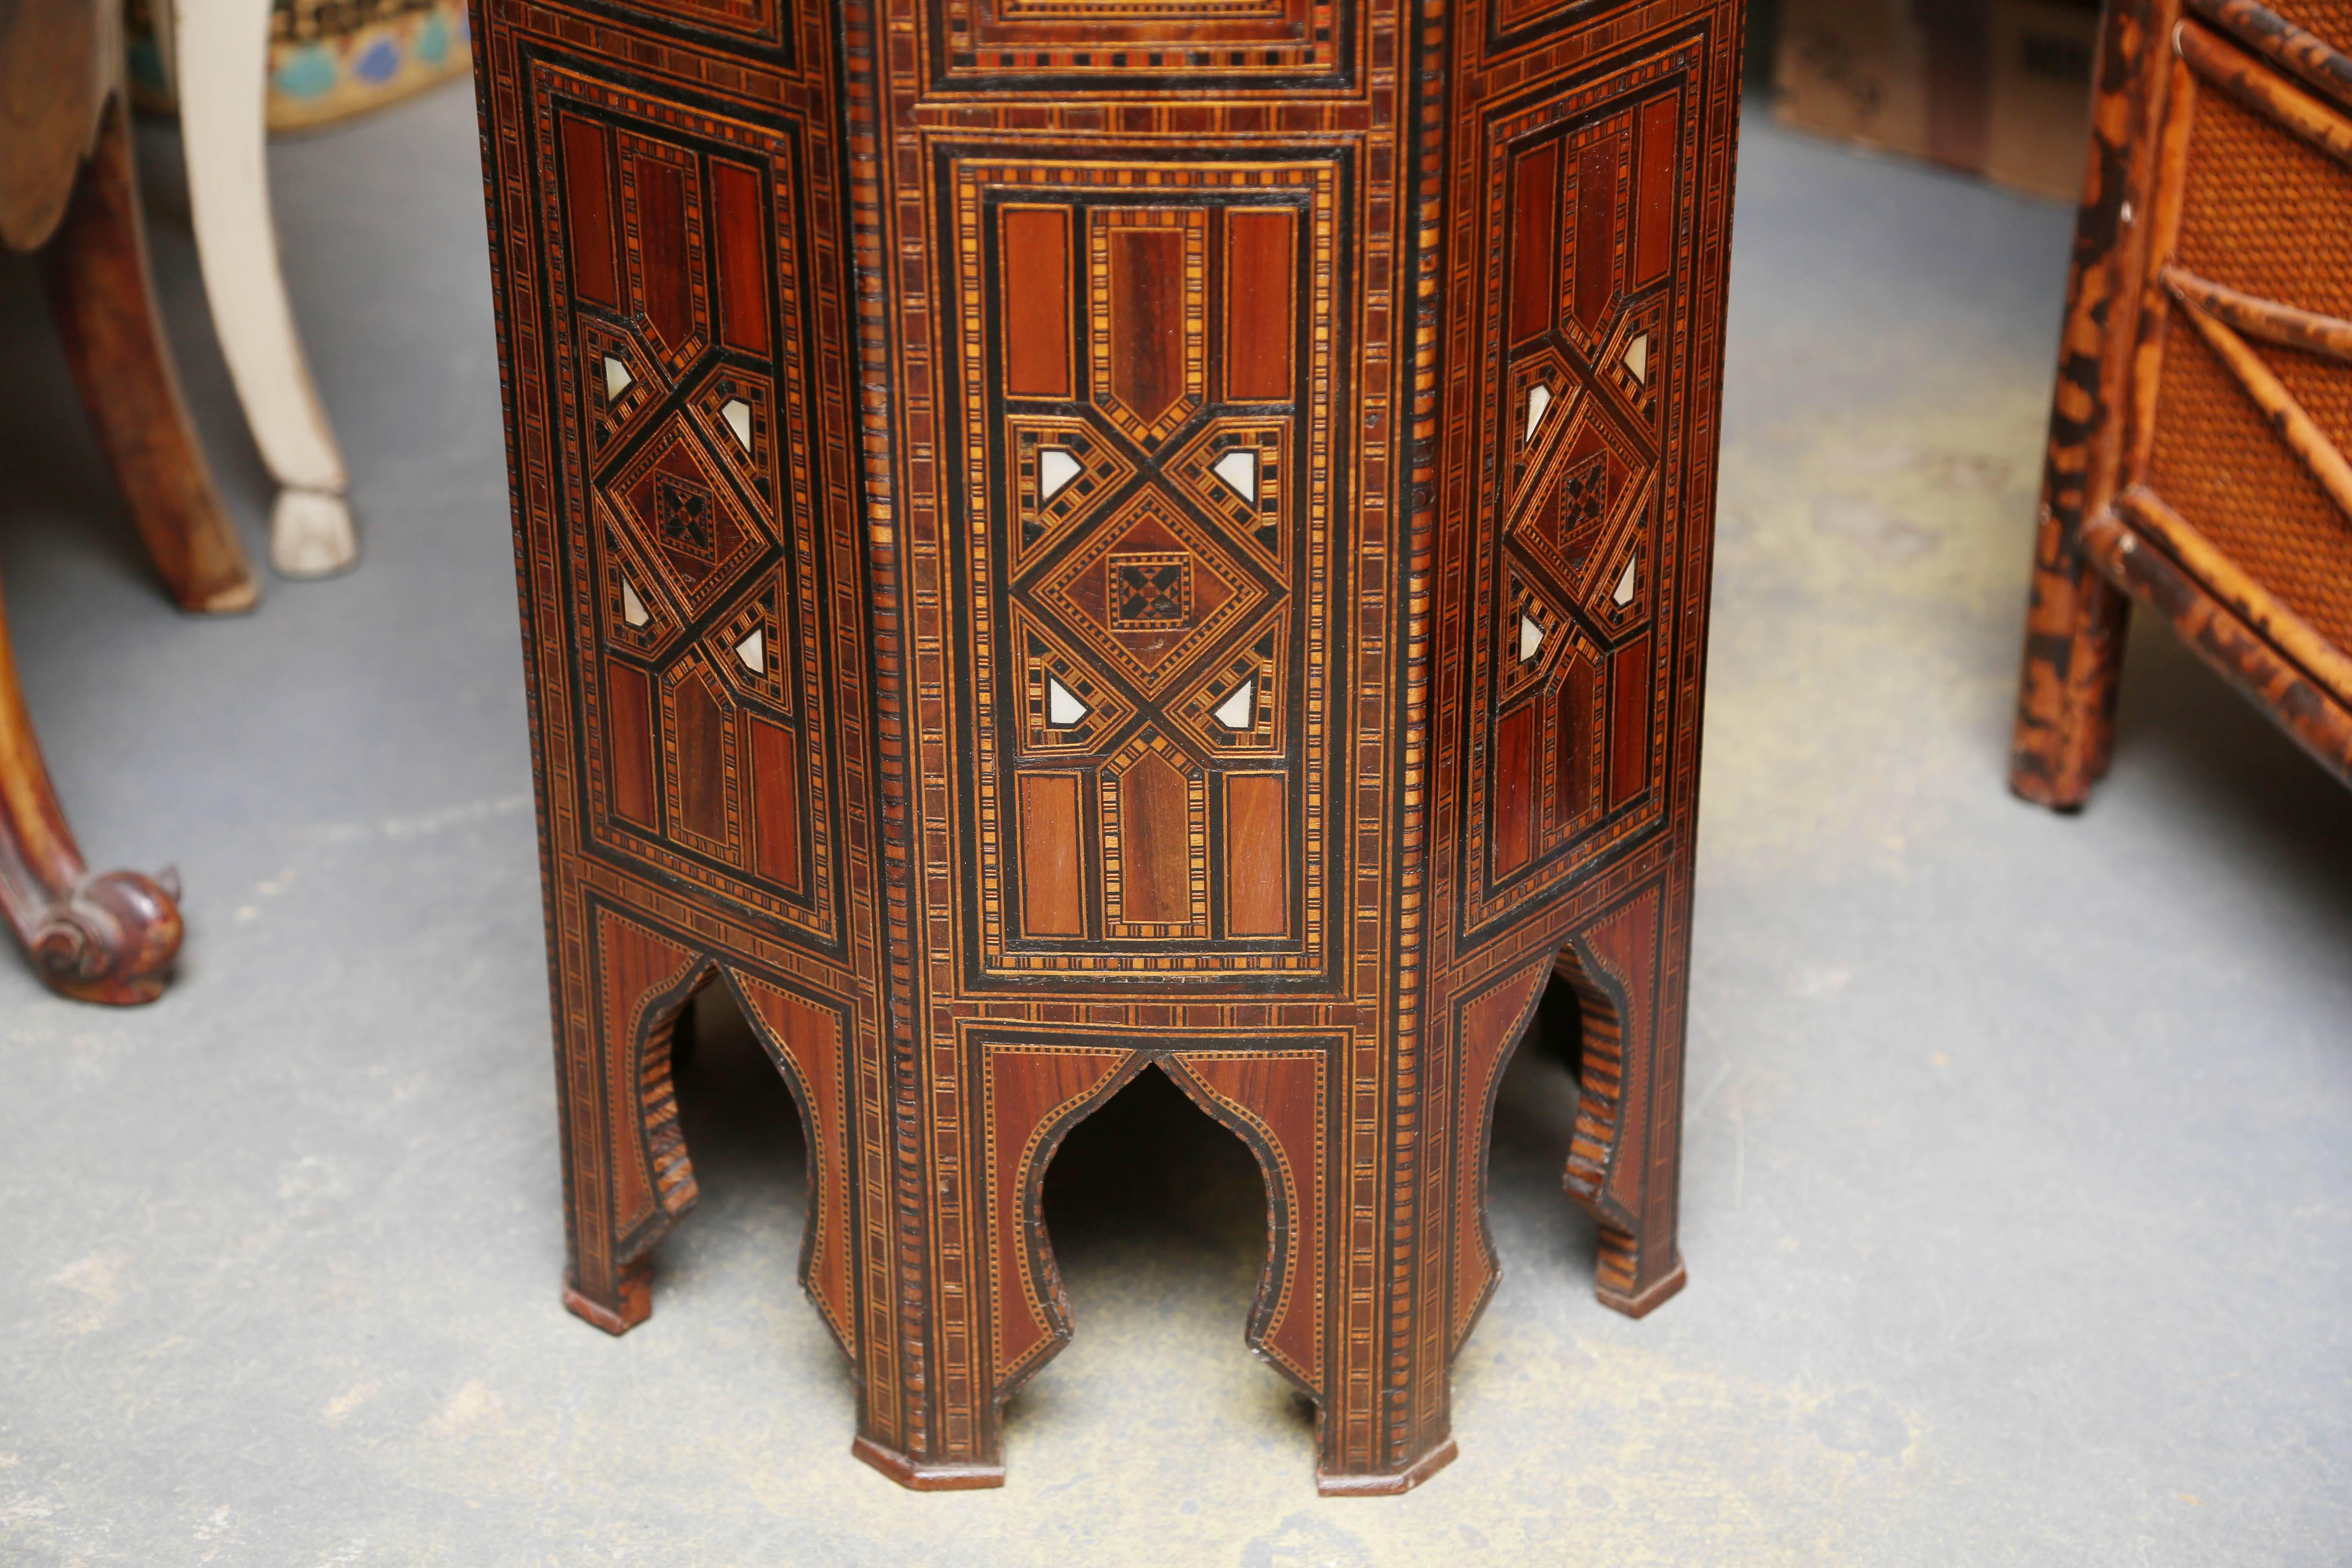 Mother-of-Pearl Superb 19th Century Syrian Tabouret